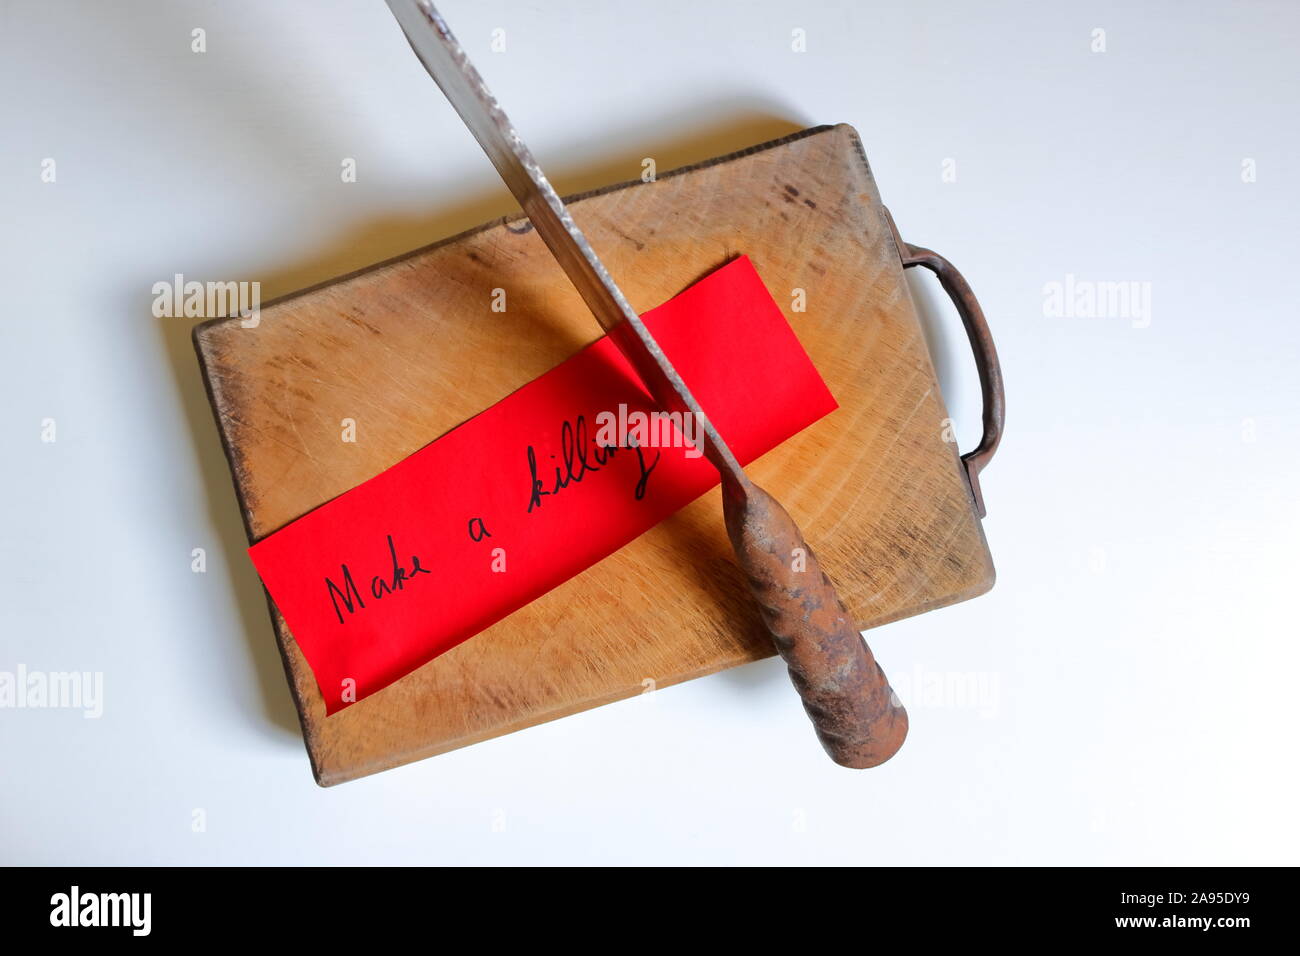 Closeup and focus on the phrase make a killing written on red paper, stuck to the cutting board with rusty chopping knife, on white wooden surface Stock Photo